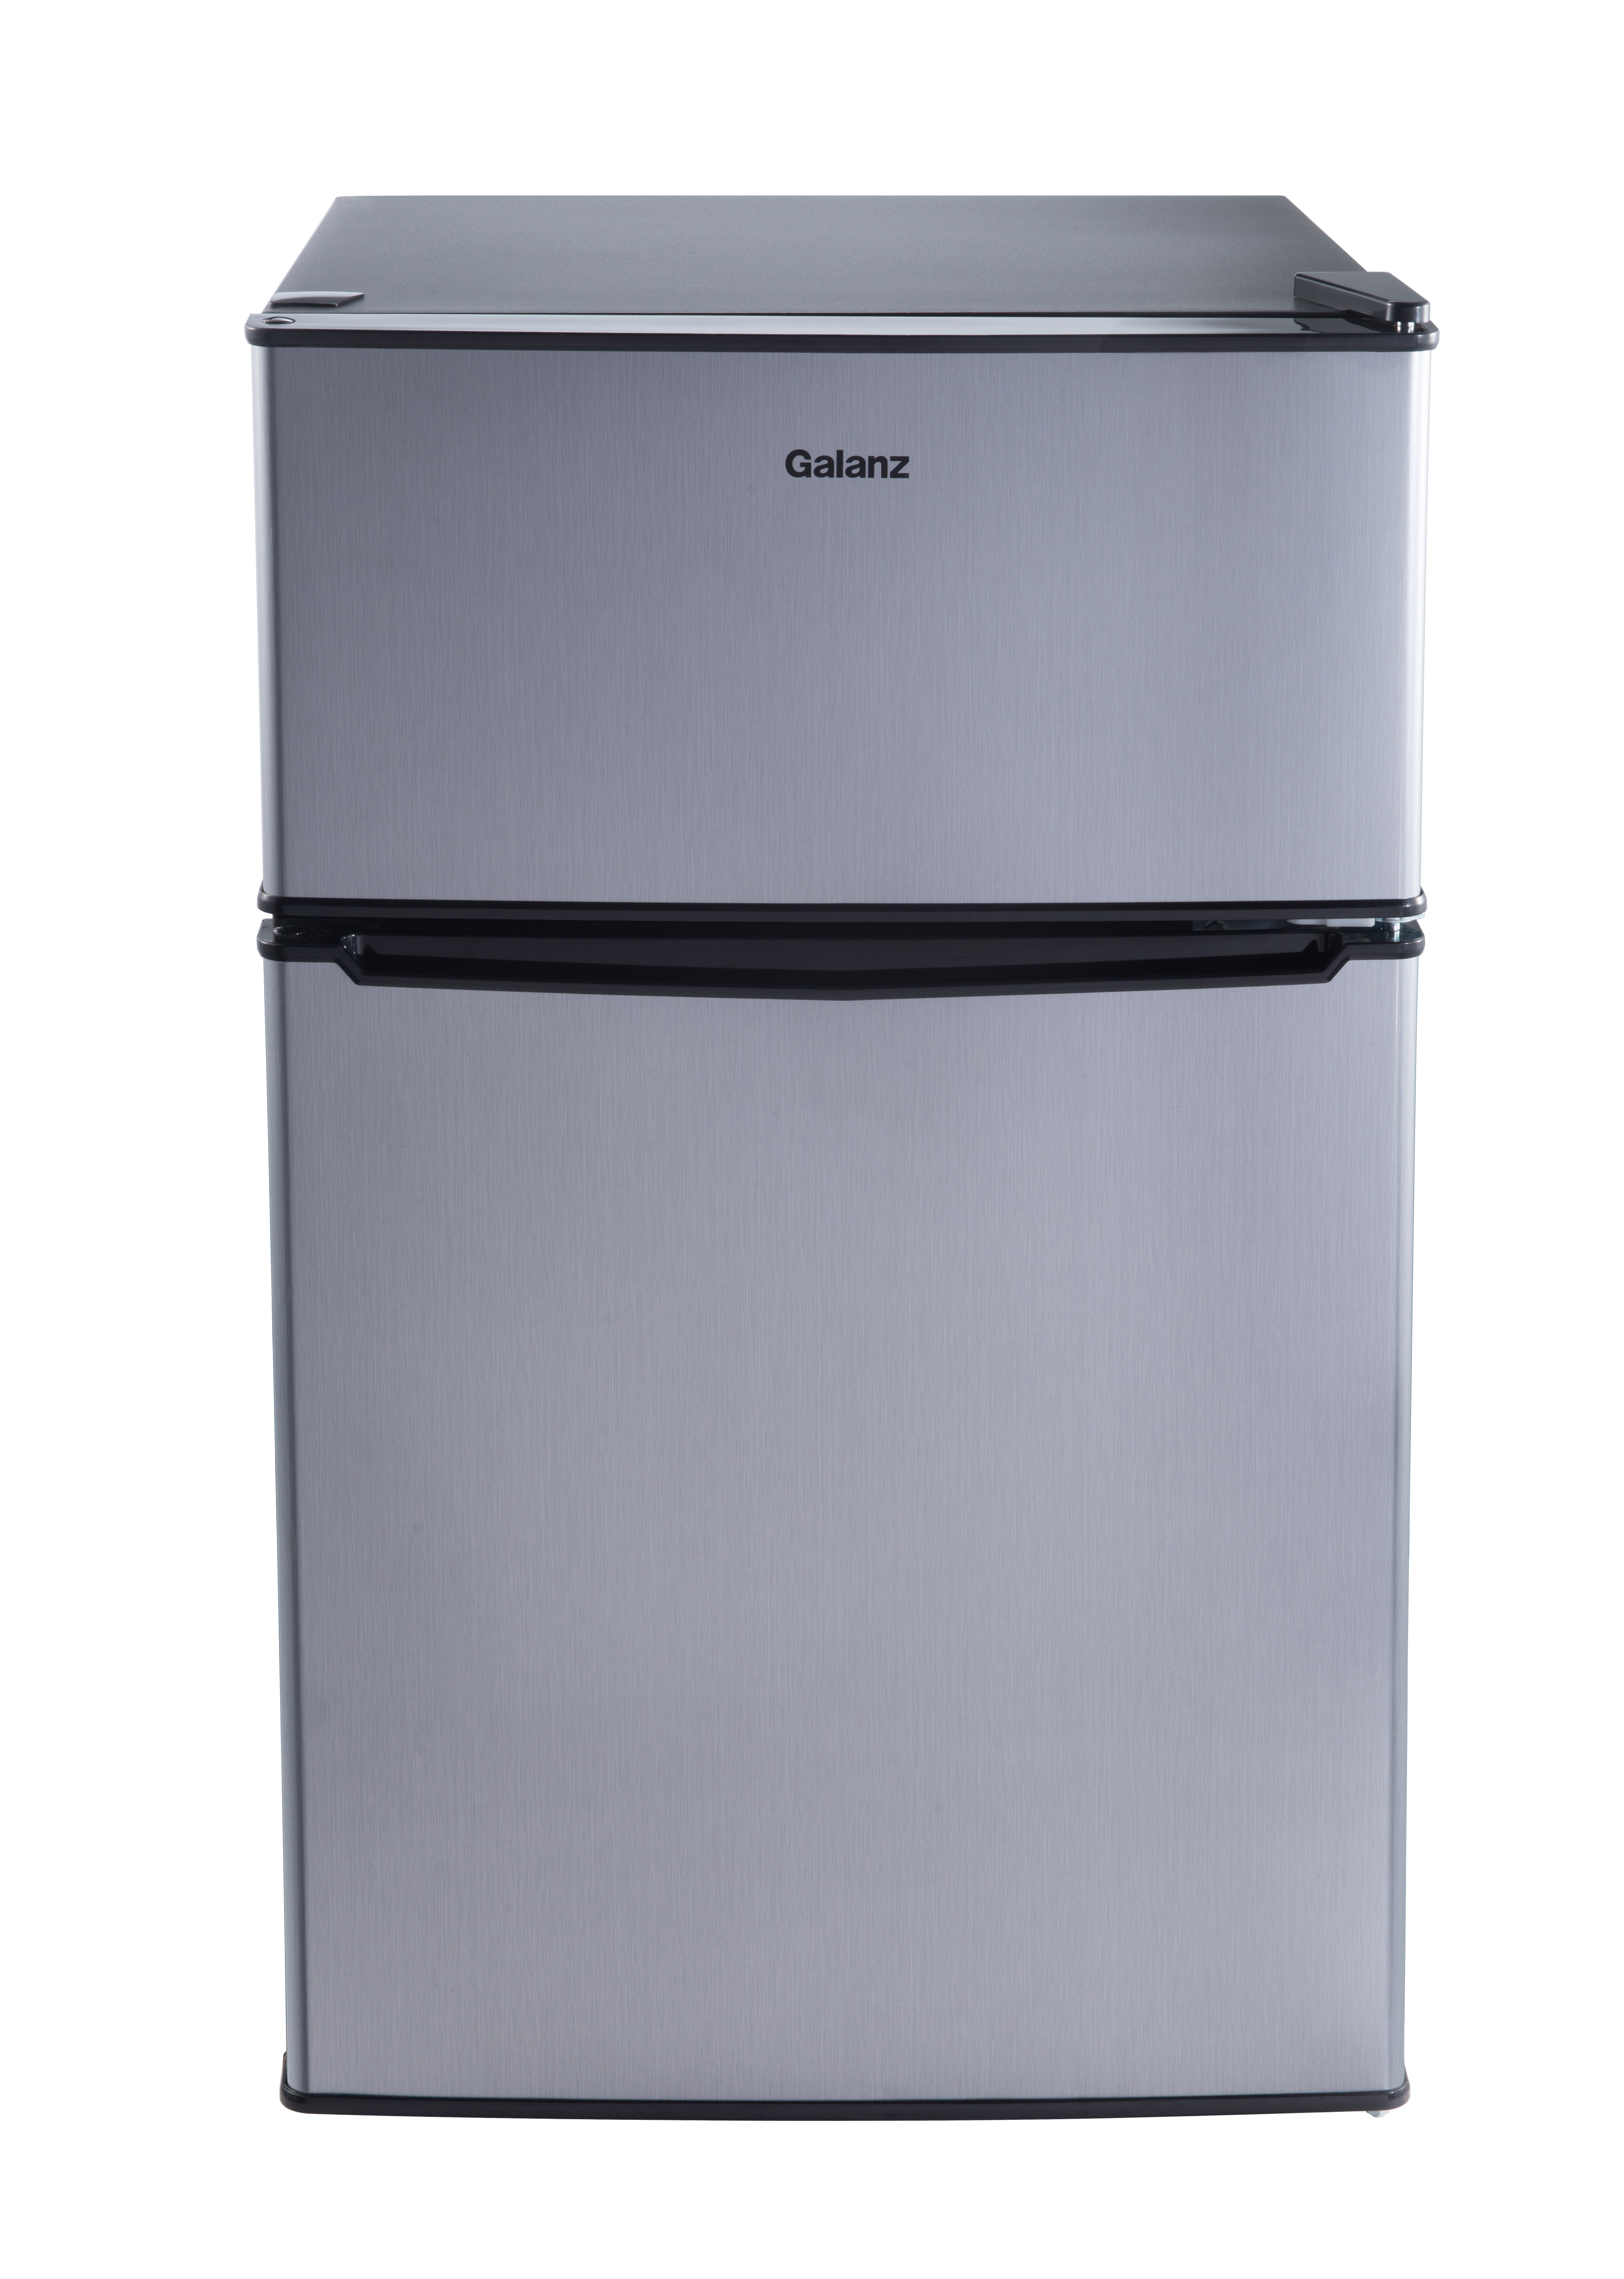 Galanz 3.1 Cu ft Two Door Mini Fridge with Freezer Estar GL31S5E, Stainless - image 1 of 6